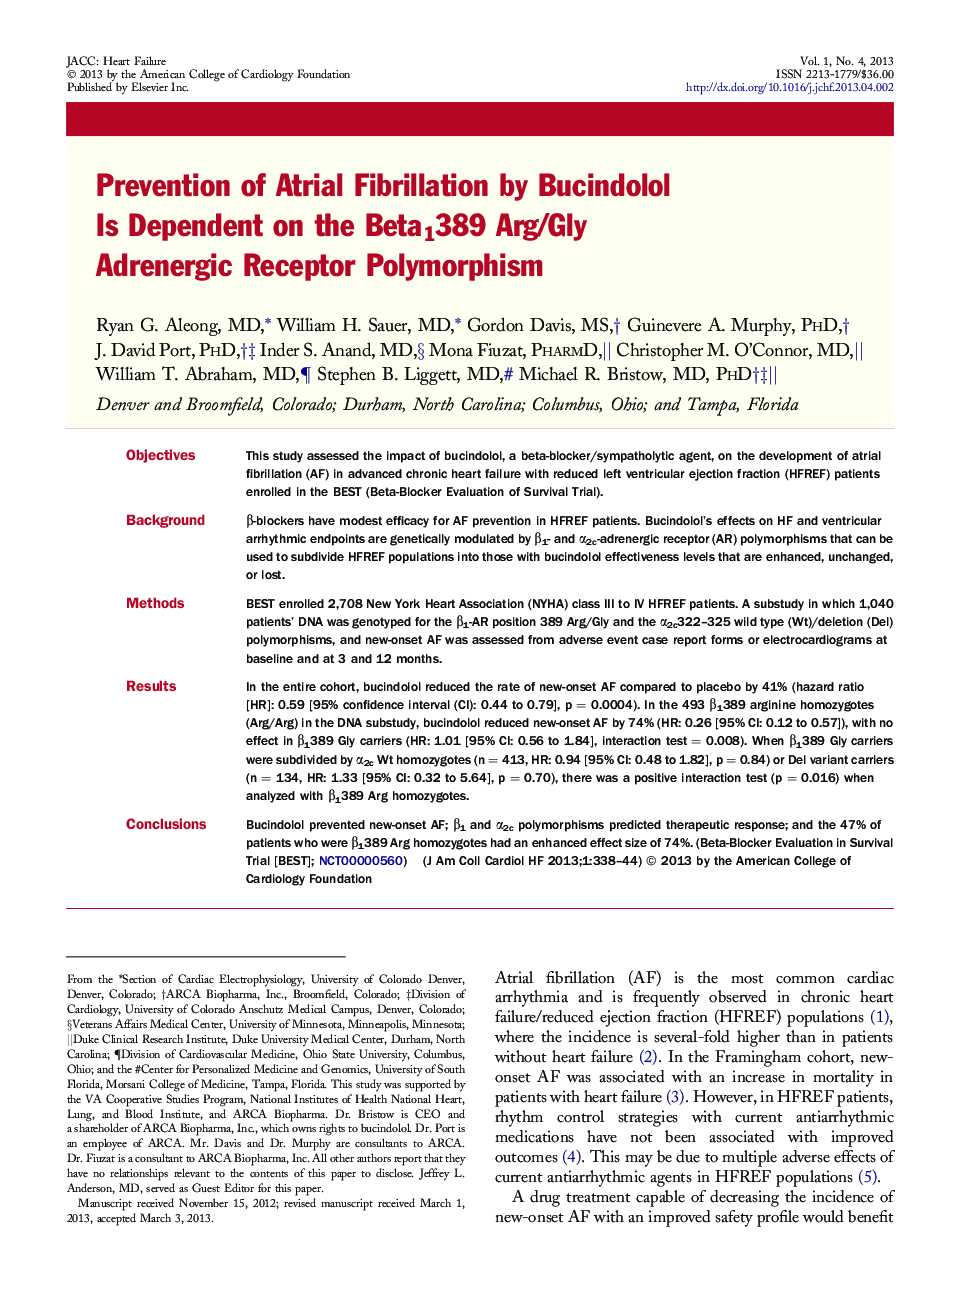 Prevention of Atrial Fibrillation by Bucindolol Is Dependent on the Beta1389 Arg/Gly Adrenergic Receptor Polymorphism